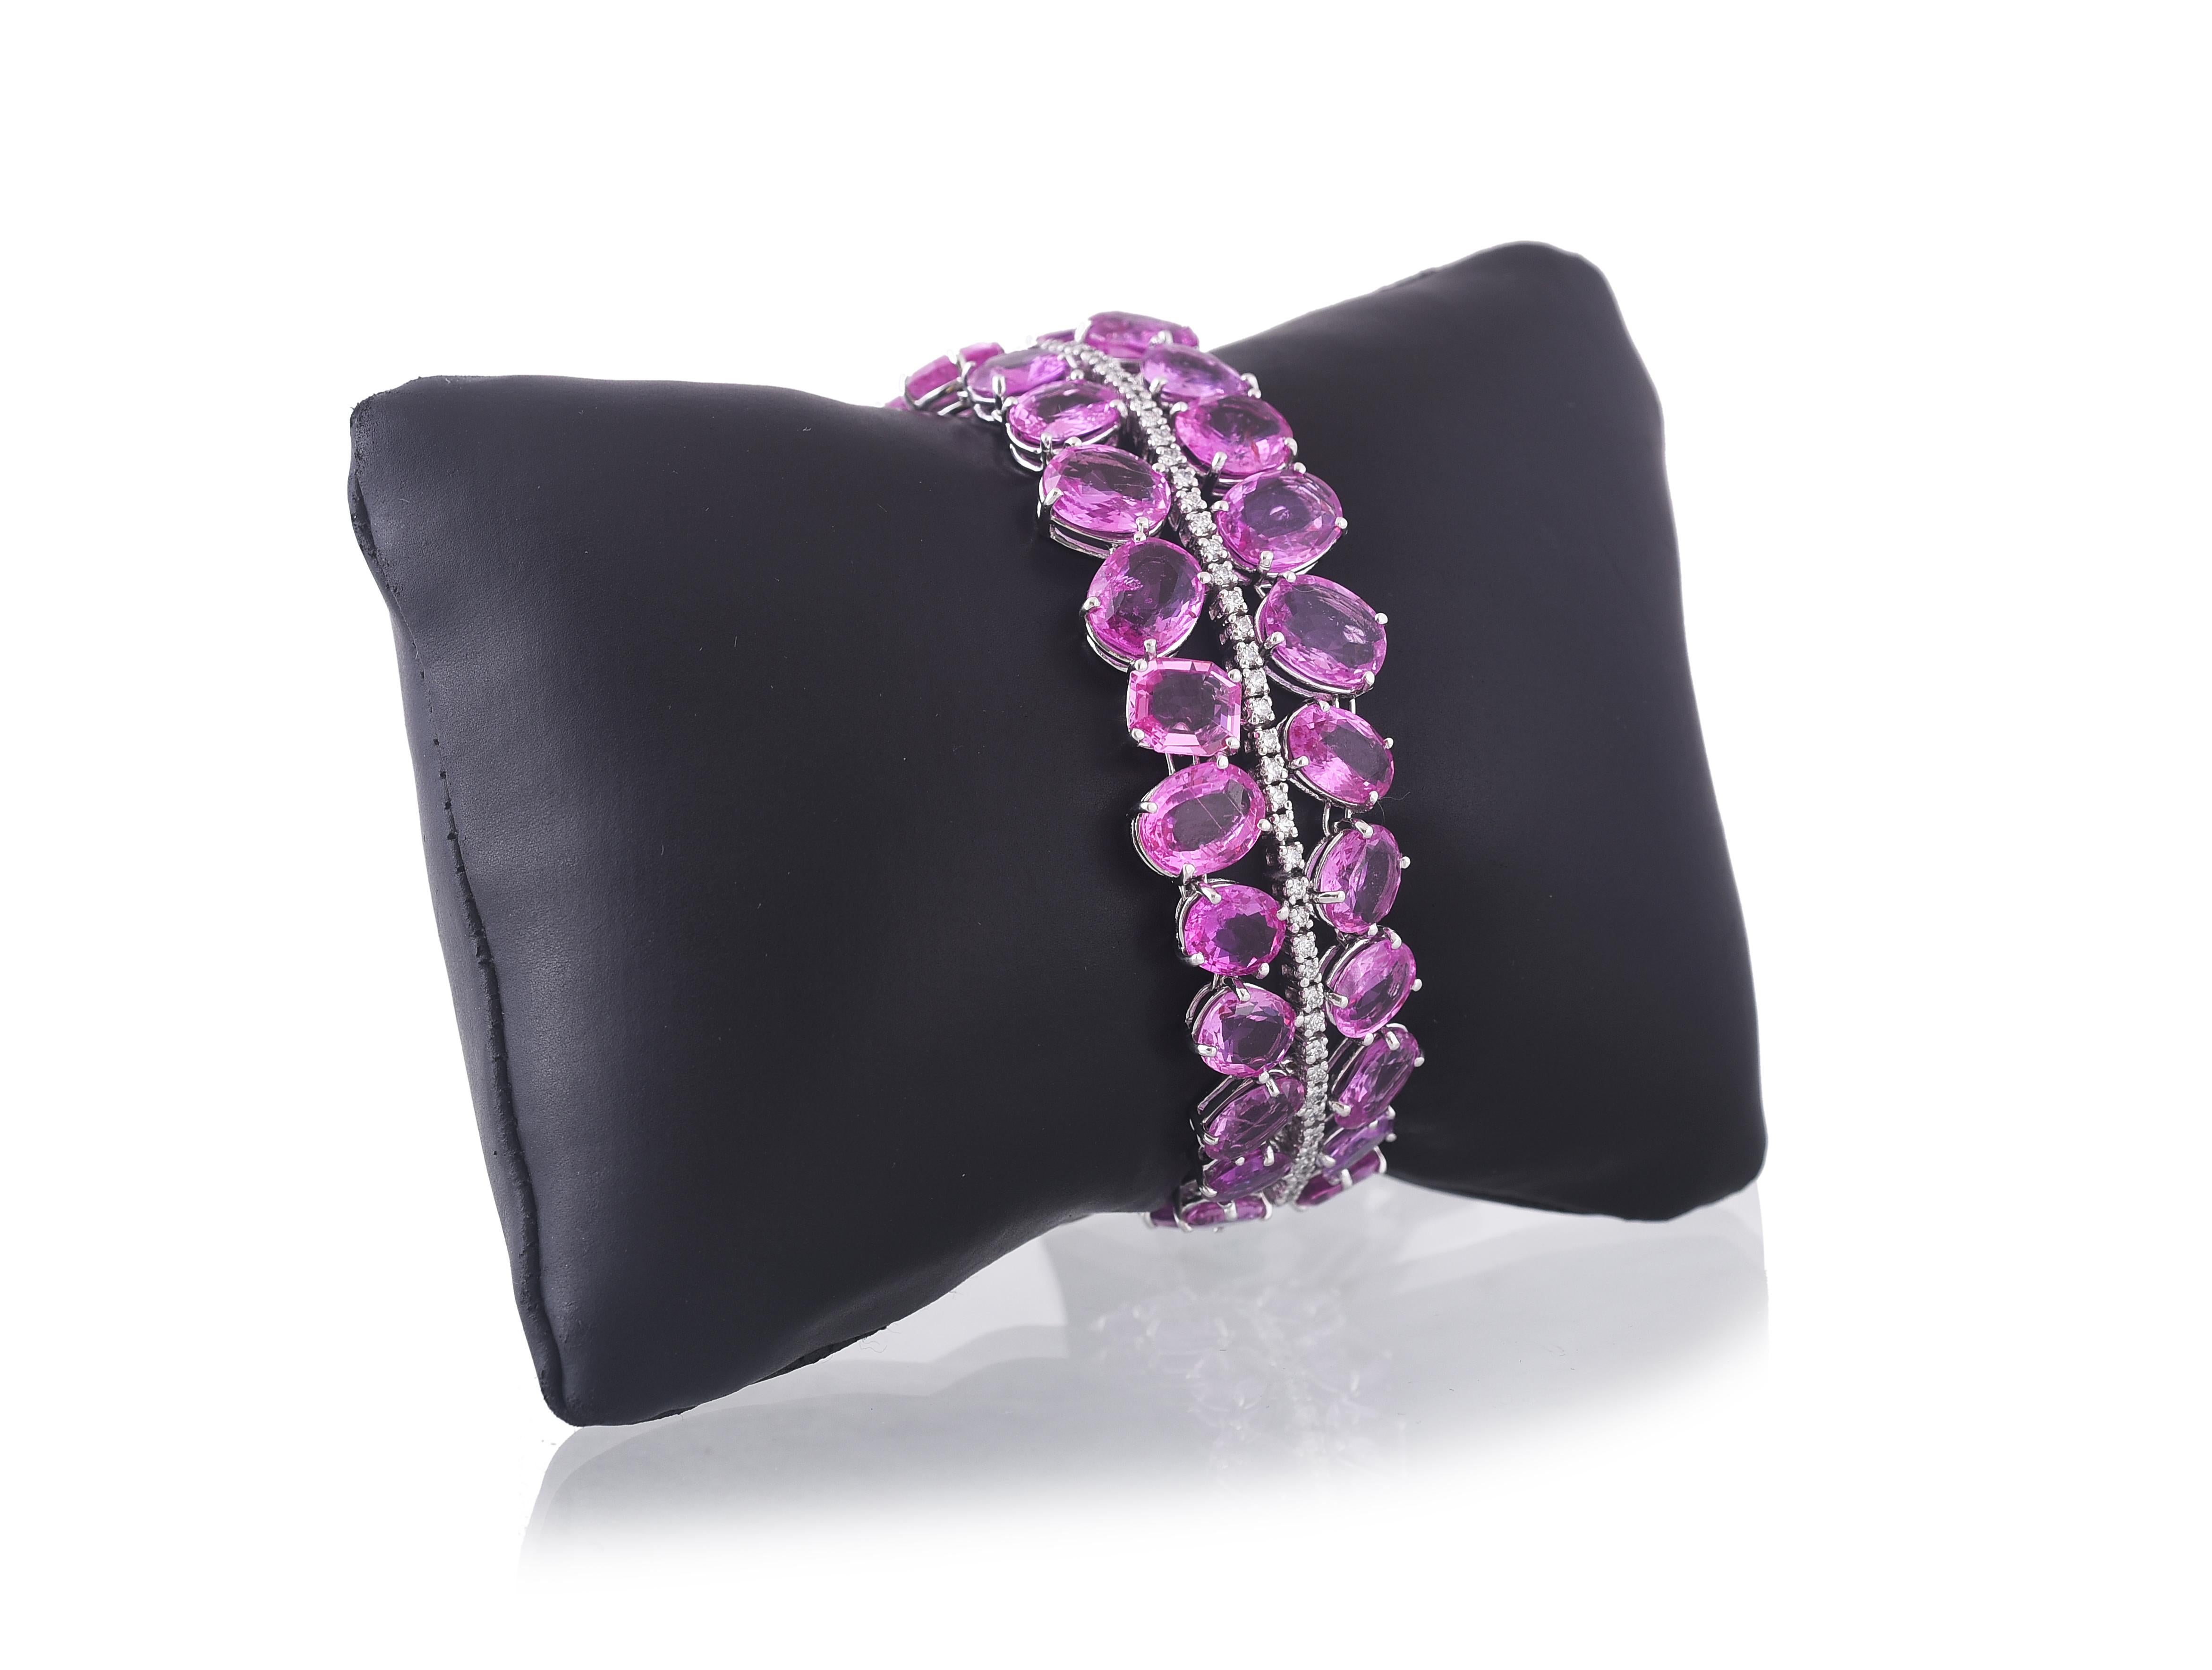 A gorgeous Pink Sapphire Rose Cut and Diamonds Bracelet set in 18K gold. The Pink sapphire is natural, a mix of heat and non-heat, originating from Madagascar, Africa. The weight of the Pink Sapphire is 68.61 carats. The total weight of the diamonds